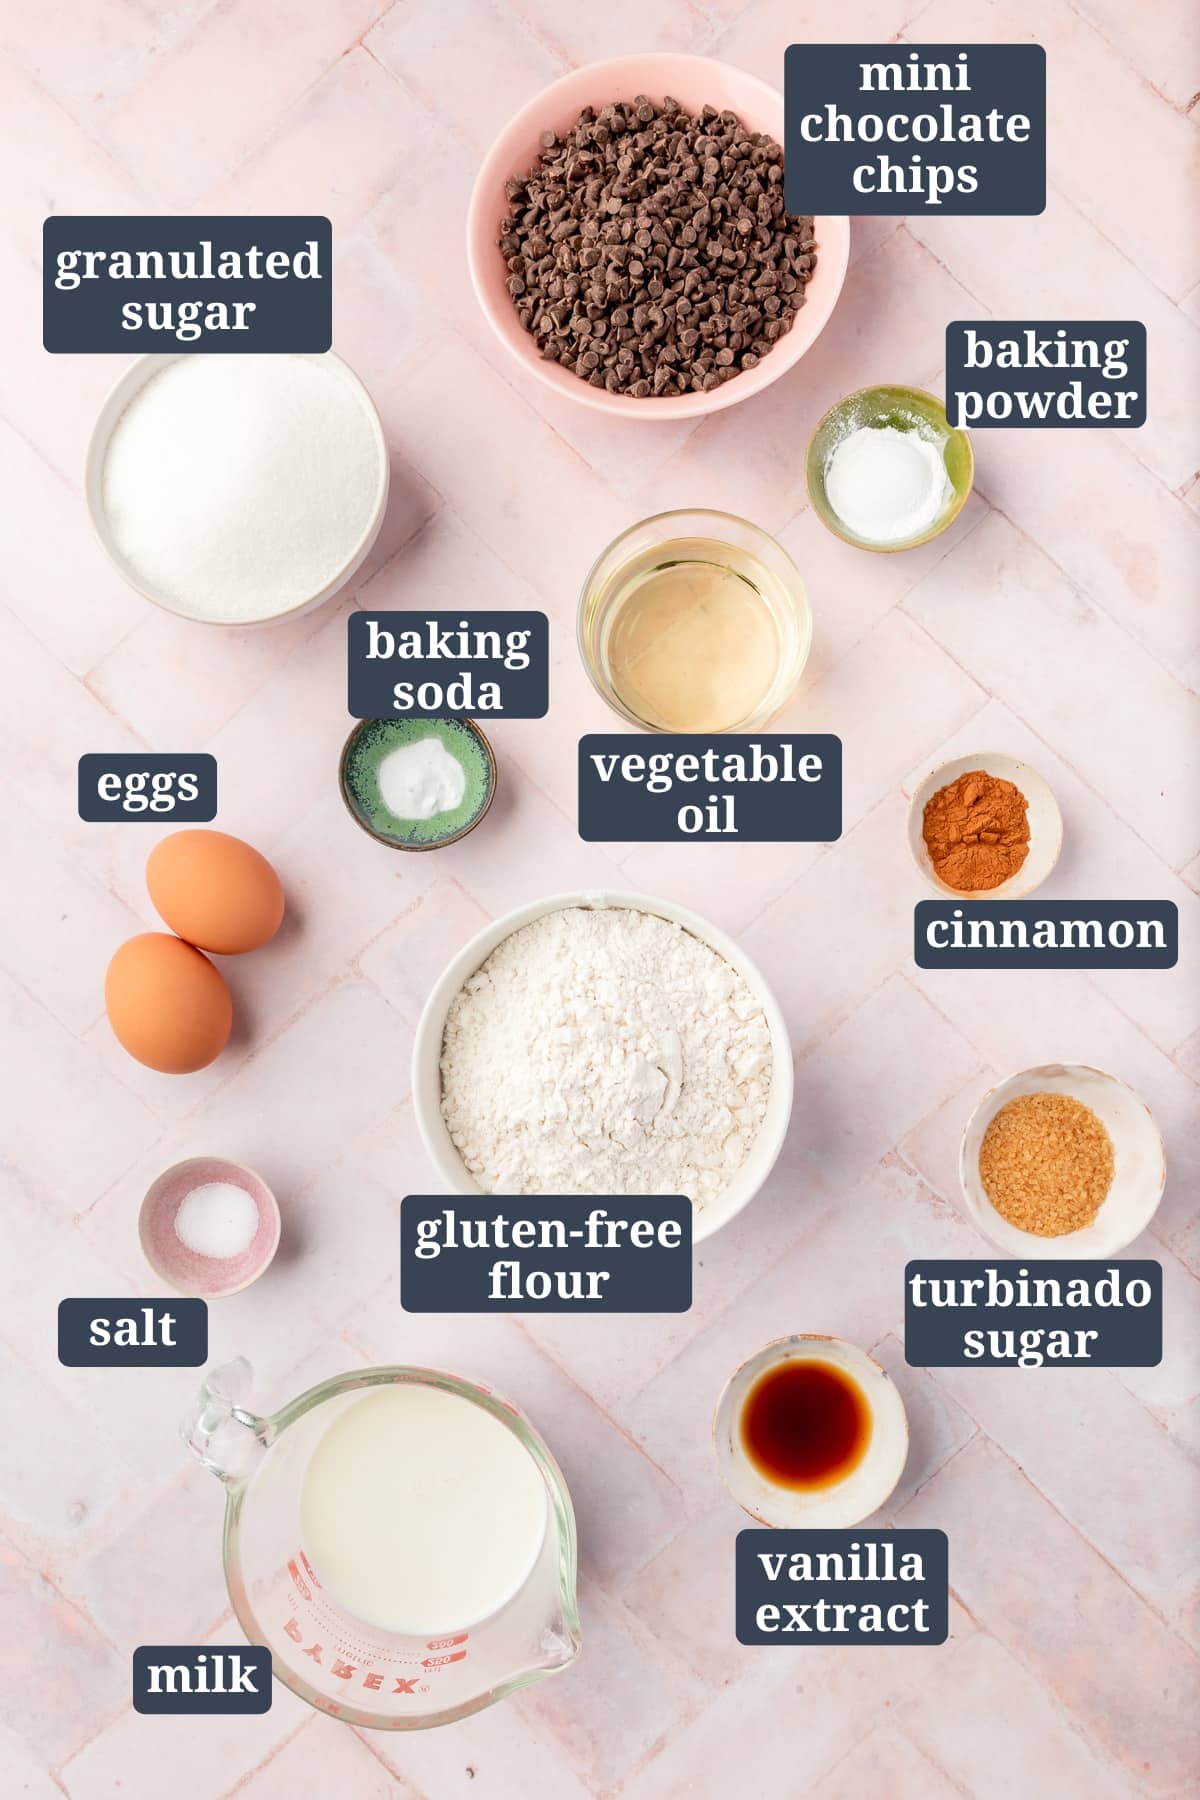 Ingredients in small bowls on a herringbone table to make gluten-free chocolate chip muffins with text overlays over each ingredient.